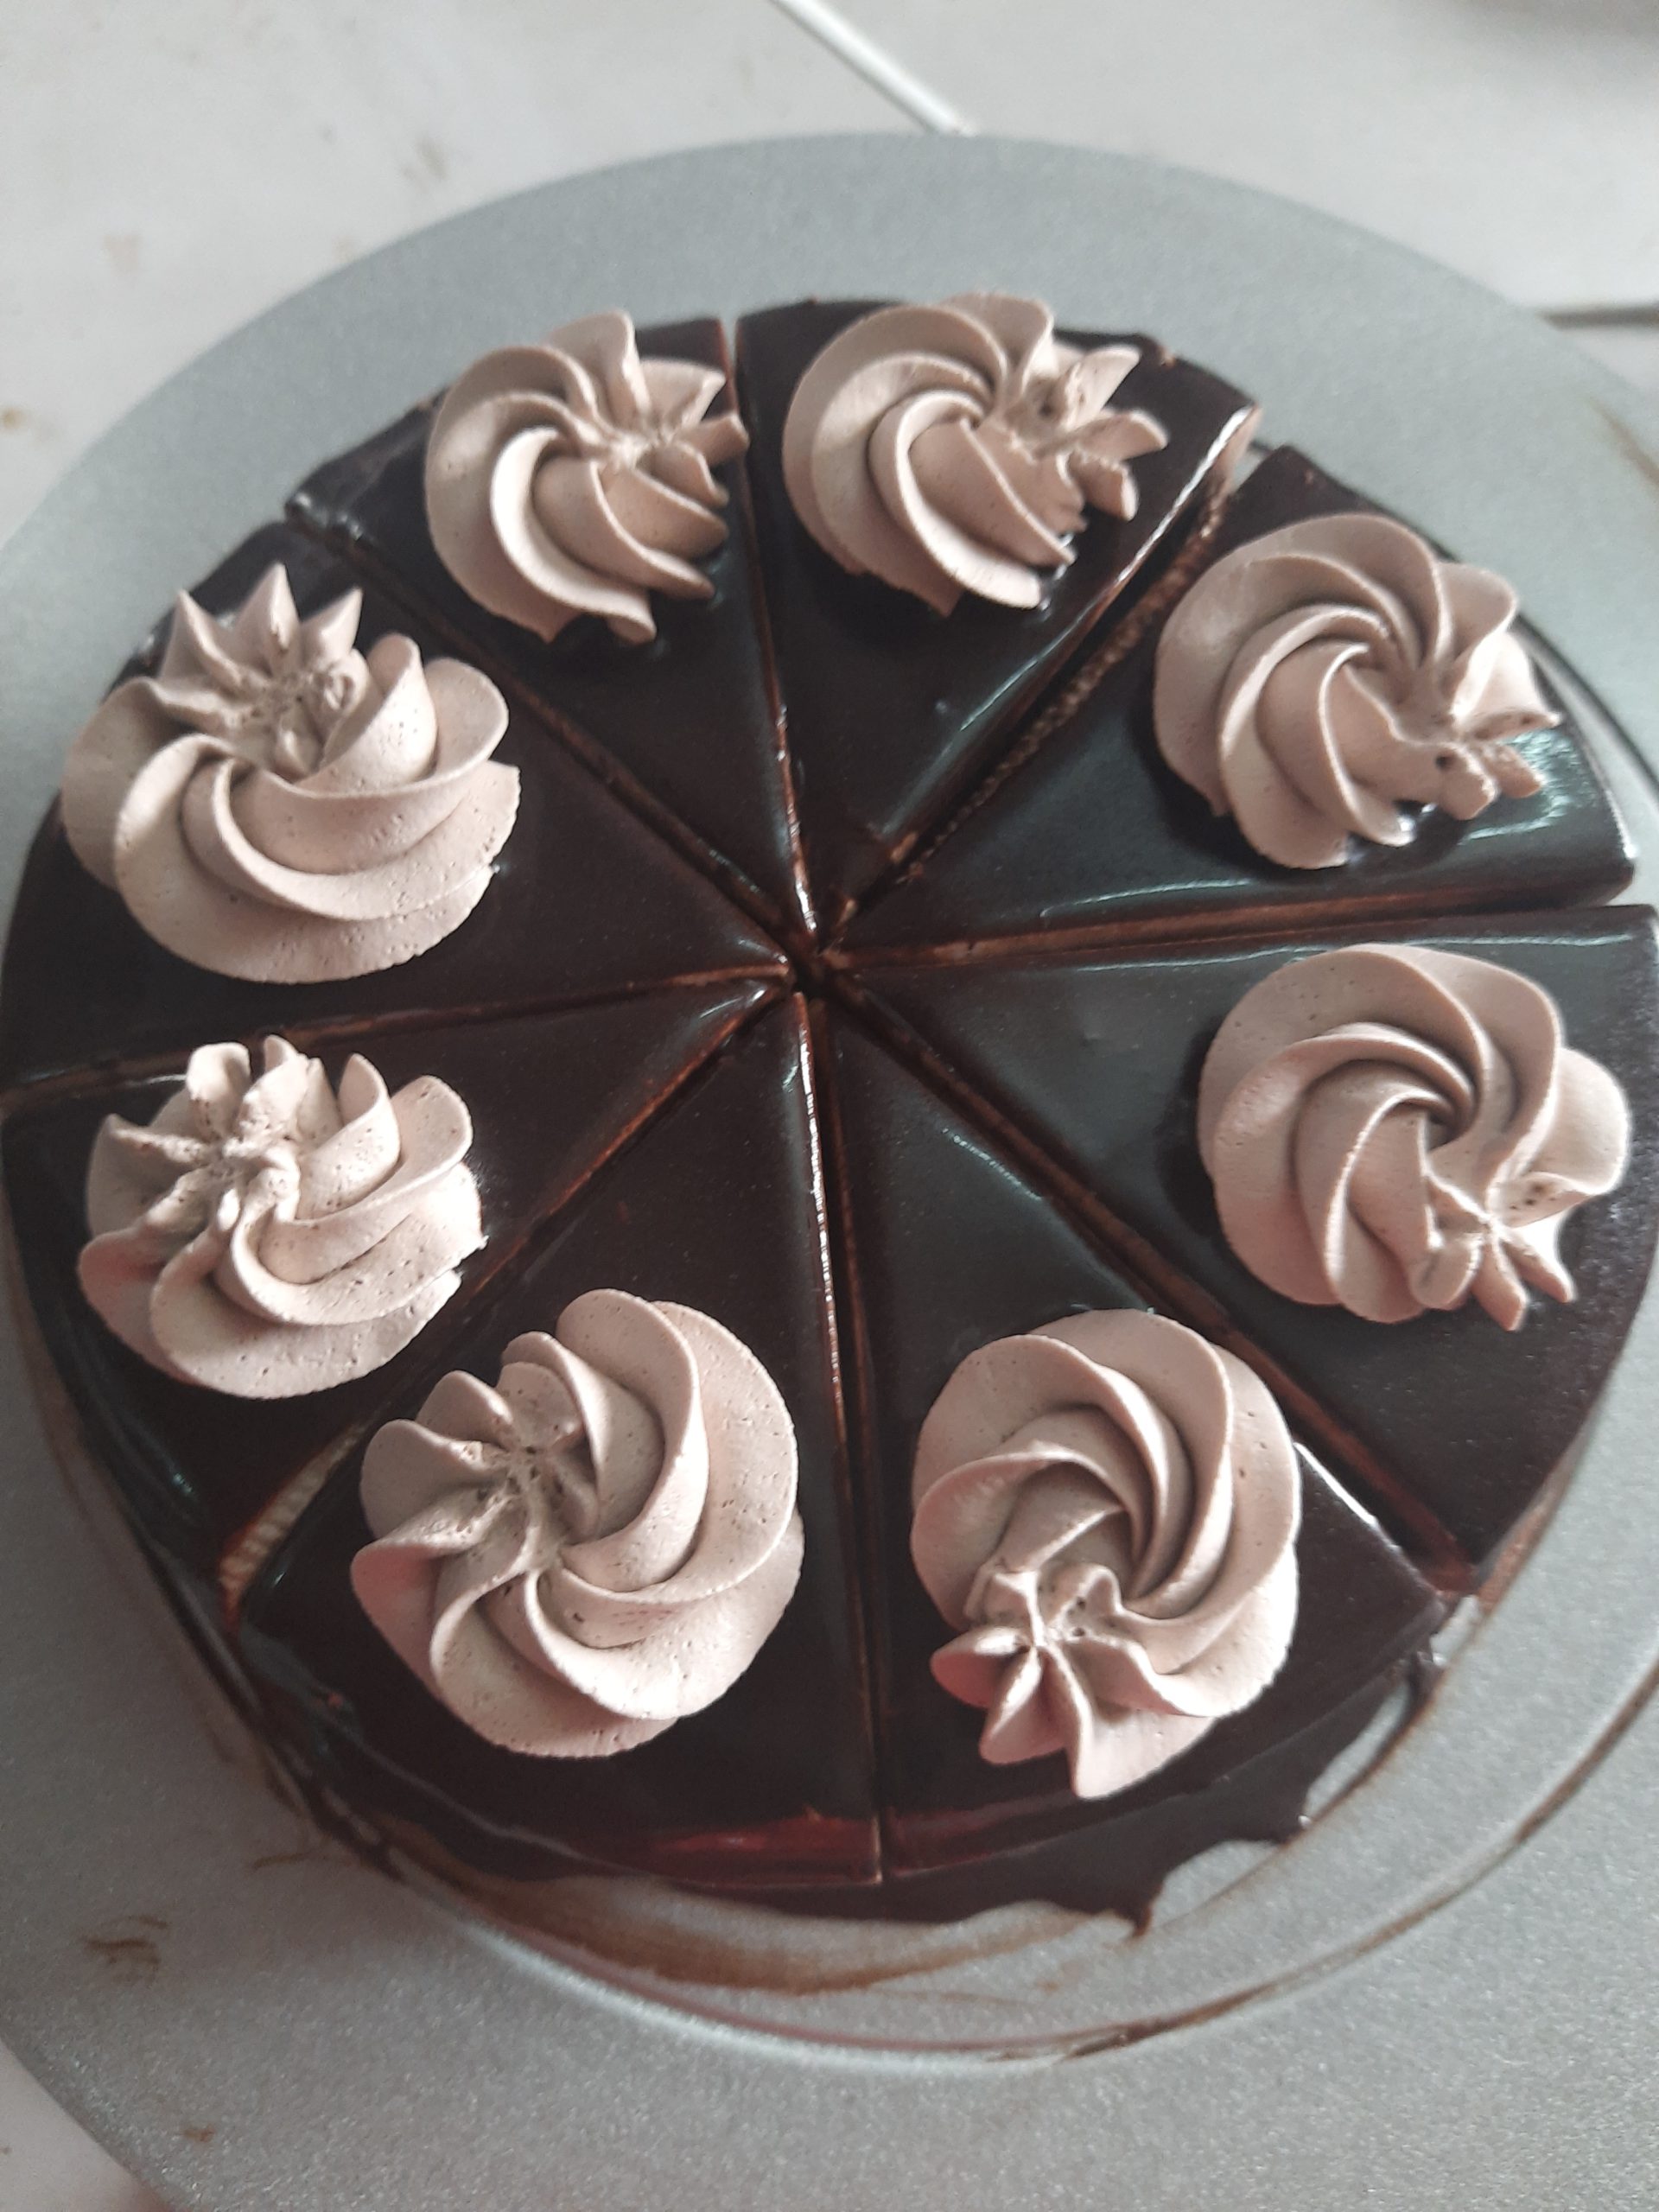 The Oven Classics|Order Cake Online|Chocolate Cakes|Fruit Cakes|Silk Cakes|Designer  Cakes|Cheese Cakes|Pastries|Snacks|Jar Cakes|Pies|Cup Cakes|Custom Designed  Cakes|Cookies